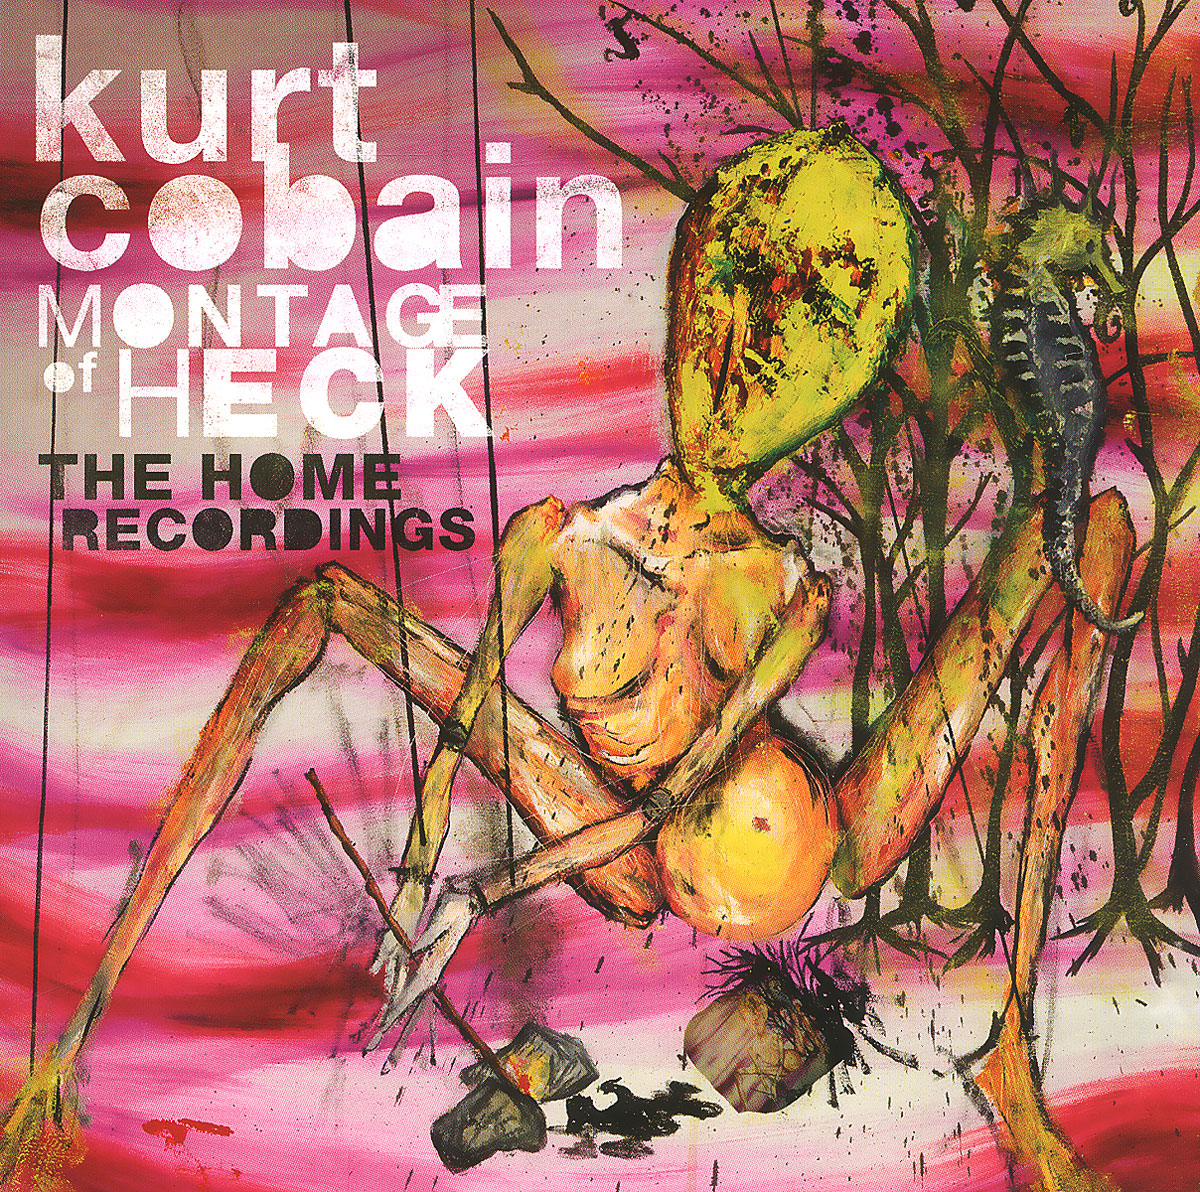 Kurt Cobain. Montage Of Heck. The Home Recordings